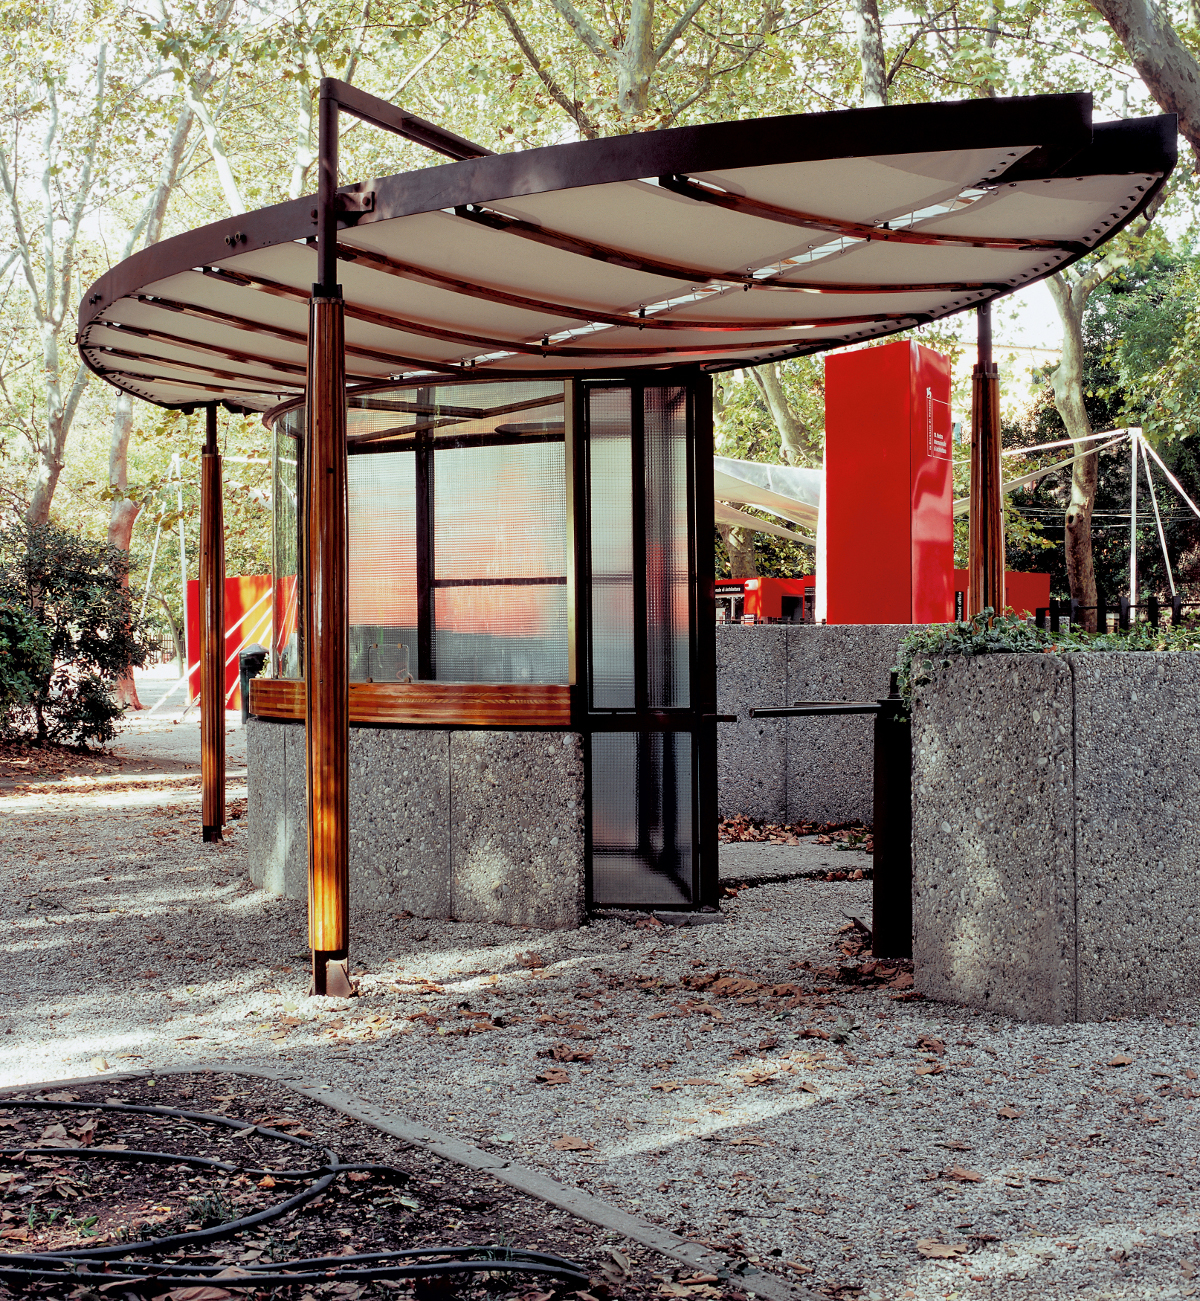 The Biennale ticket booth, Venice 1951-52